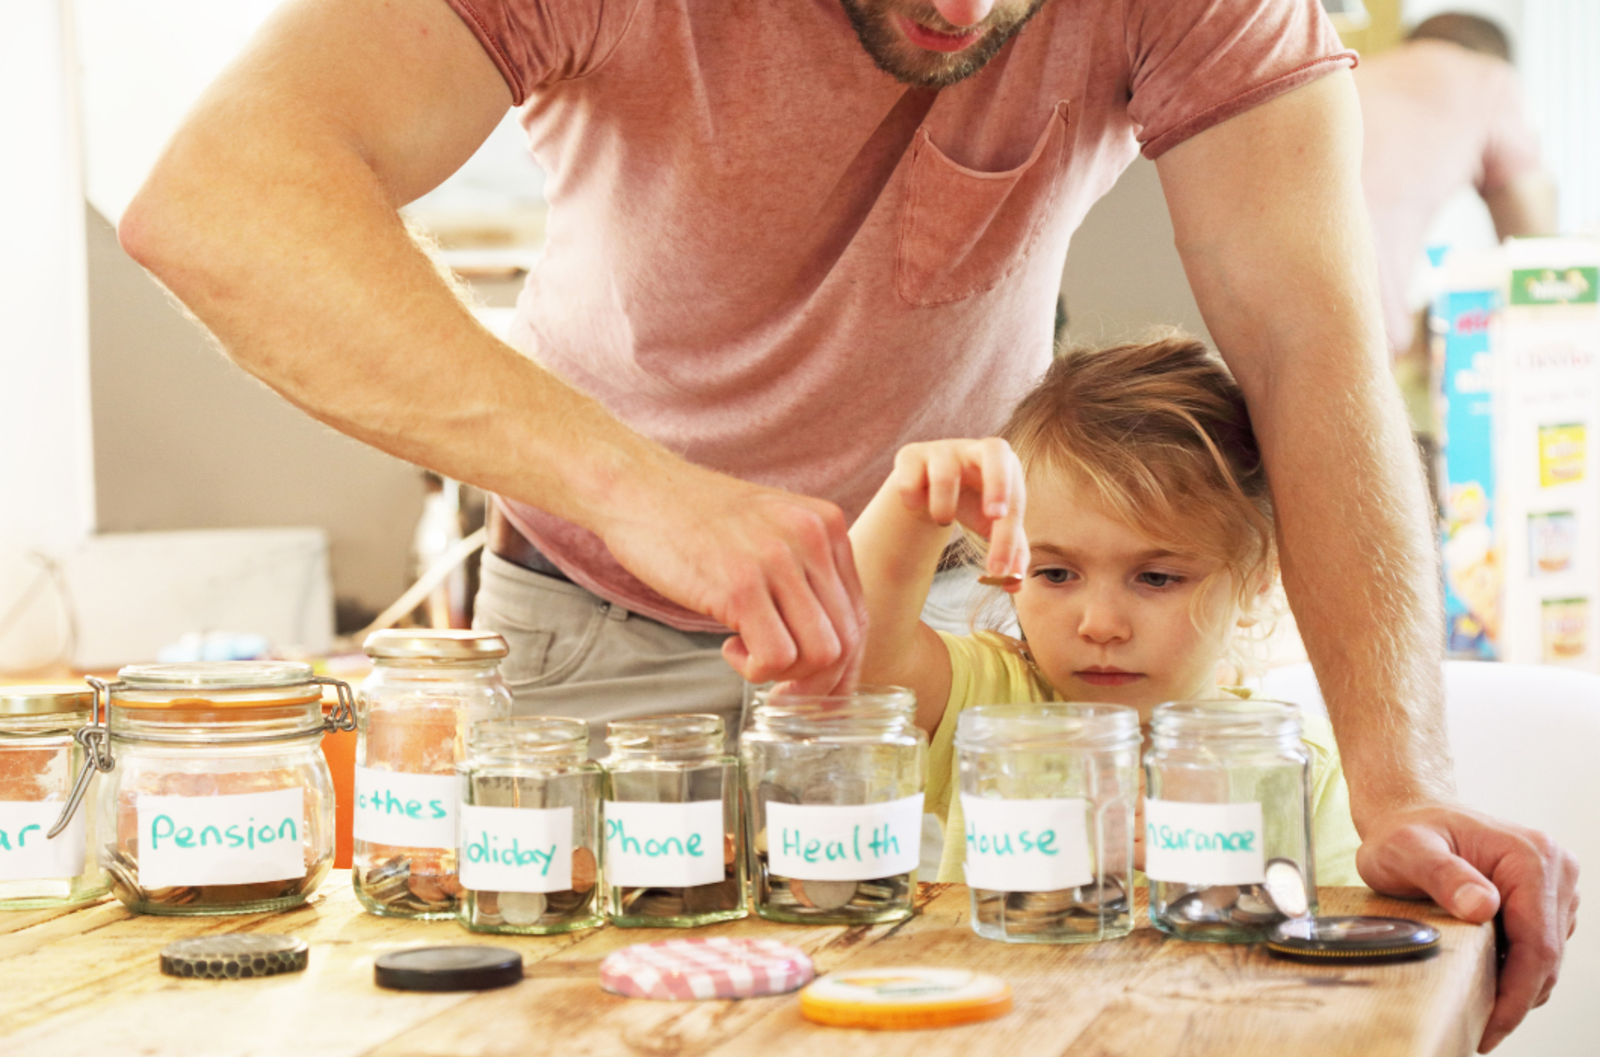 Parent and young child putting coins into labelled money jars